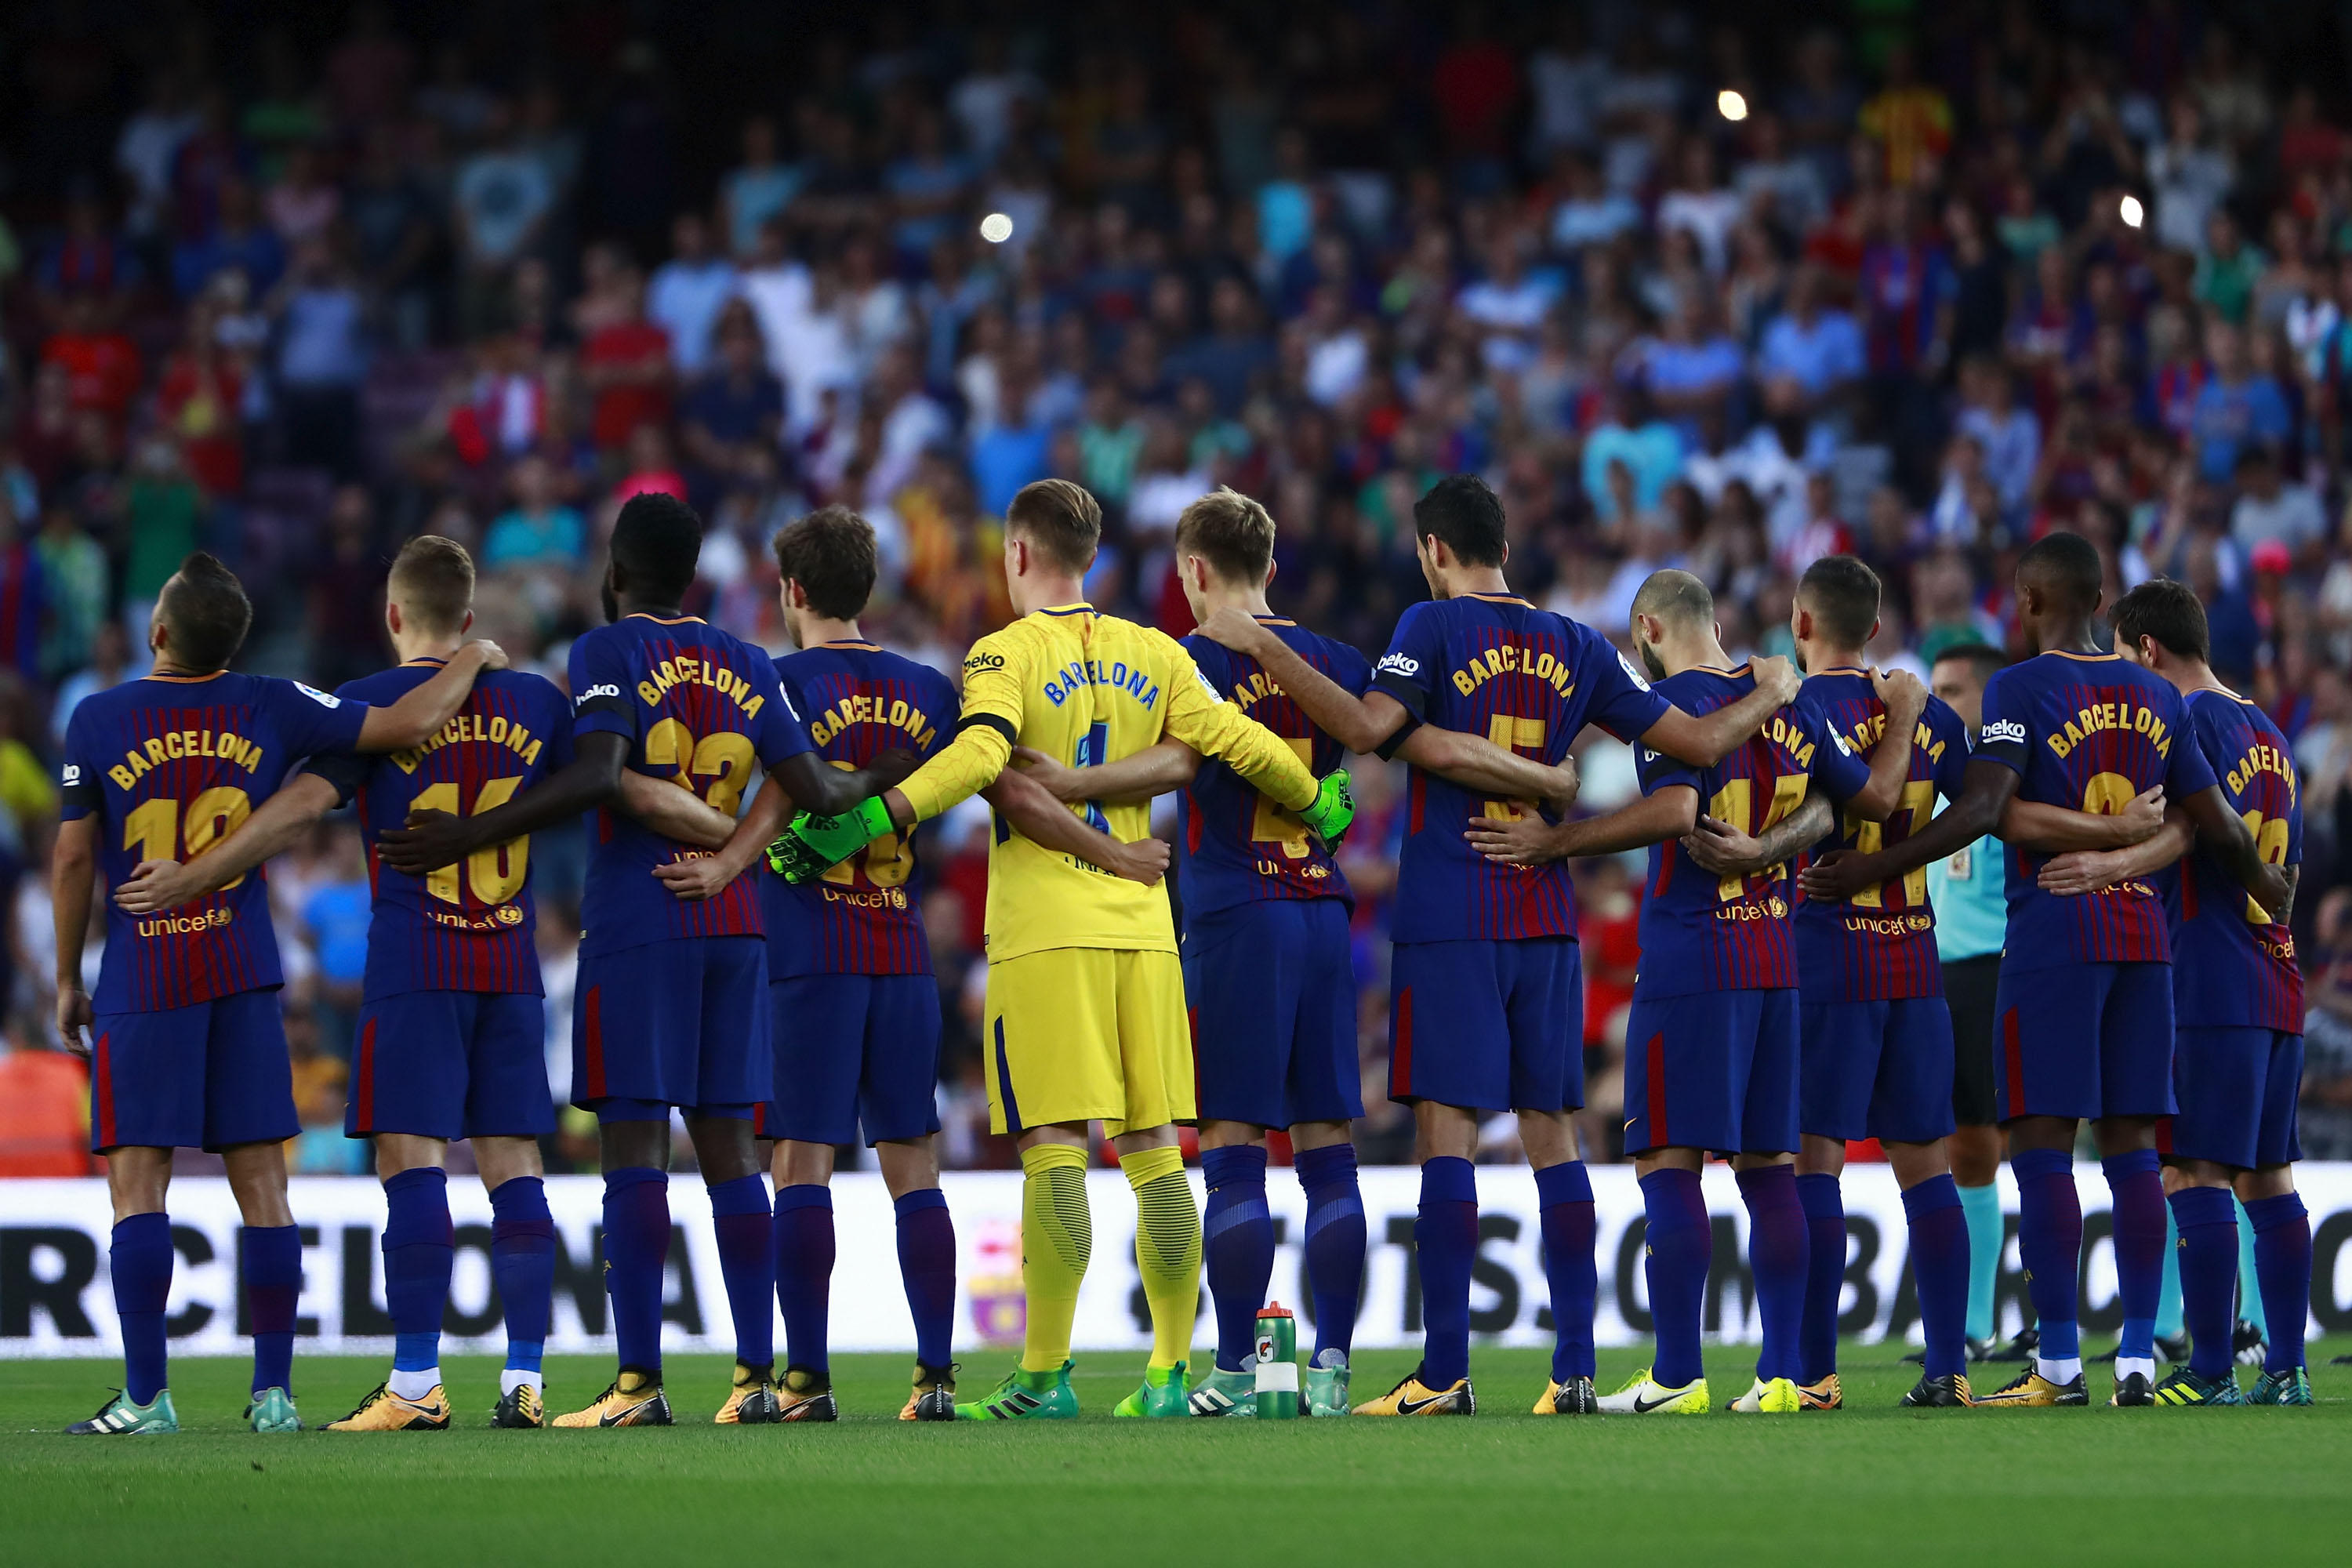 BARCELONA, SPAIN - AUGUST 20: FC Barcelona players line up to observe a minute's silence in memory of victims of the terrorist attack in Barcelona this week prior to start the La Liga match between FC Barcelona and Real Betis Balompie at Camp Nou stadium on August 20, 2017 in Barcelona, Spain. (Photo by Gonzalo Arroyo Moreno/Getty Images)